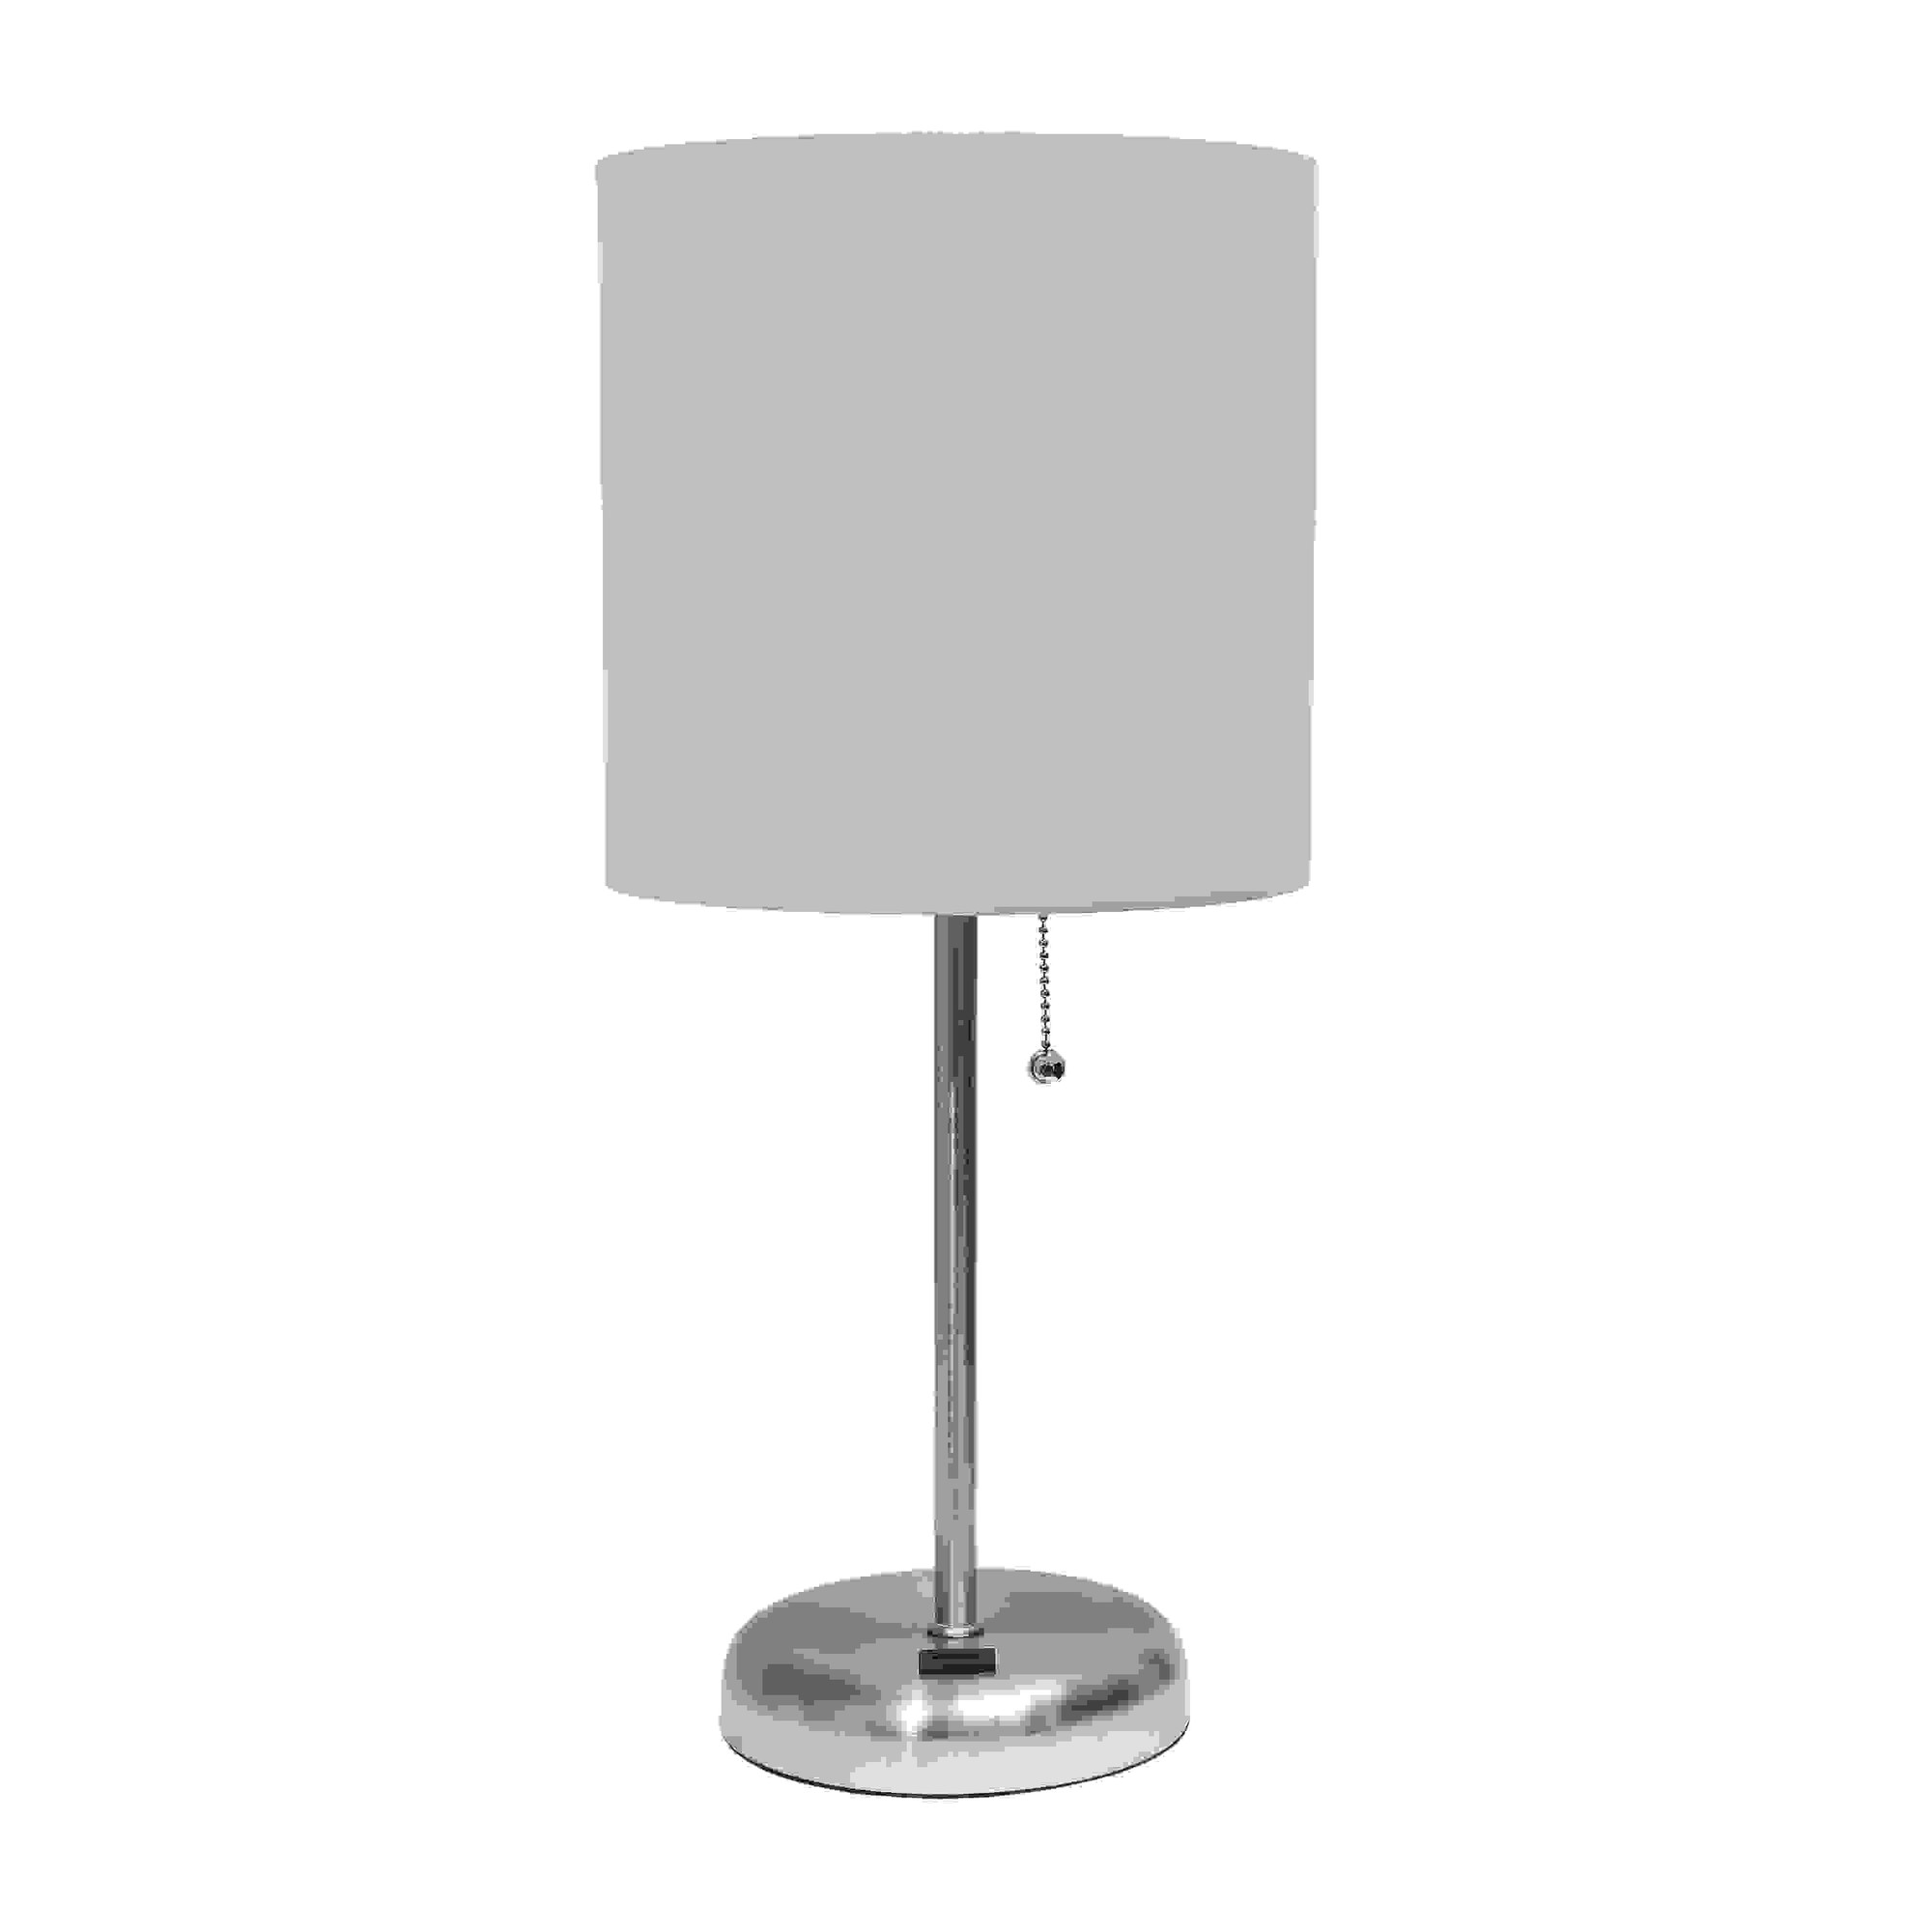 Simple Designs Stick Lamp with USB charging port and Fabric Shade, Gray